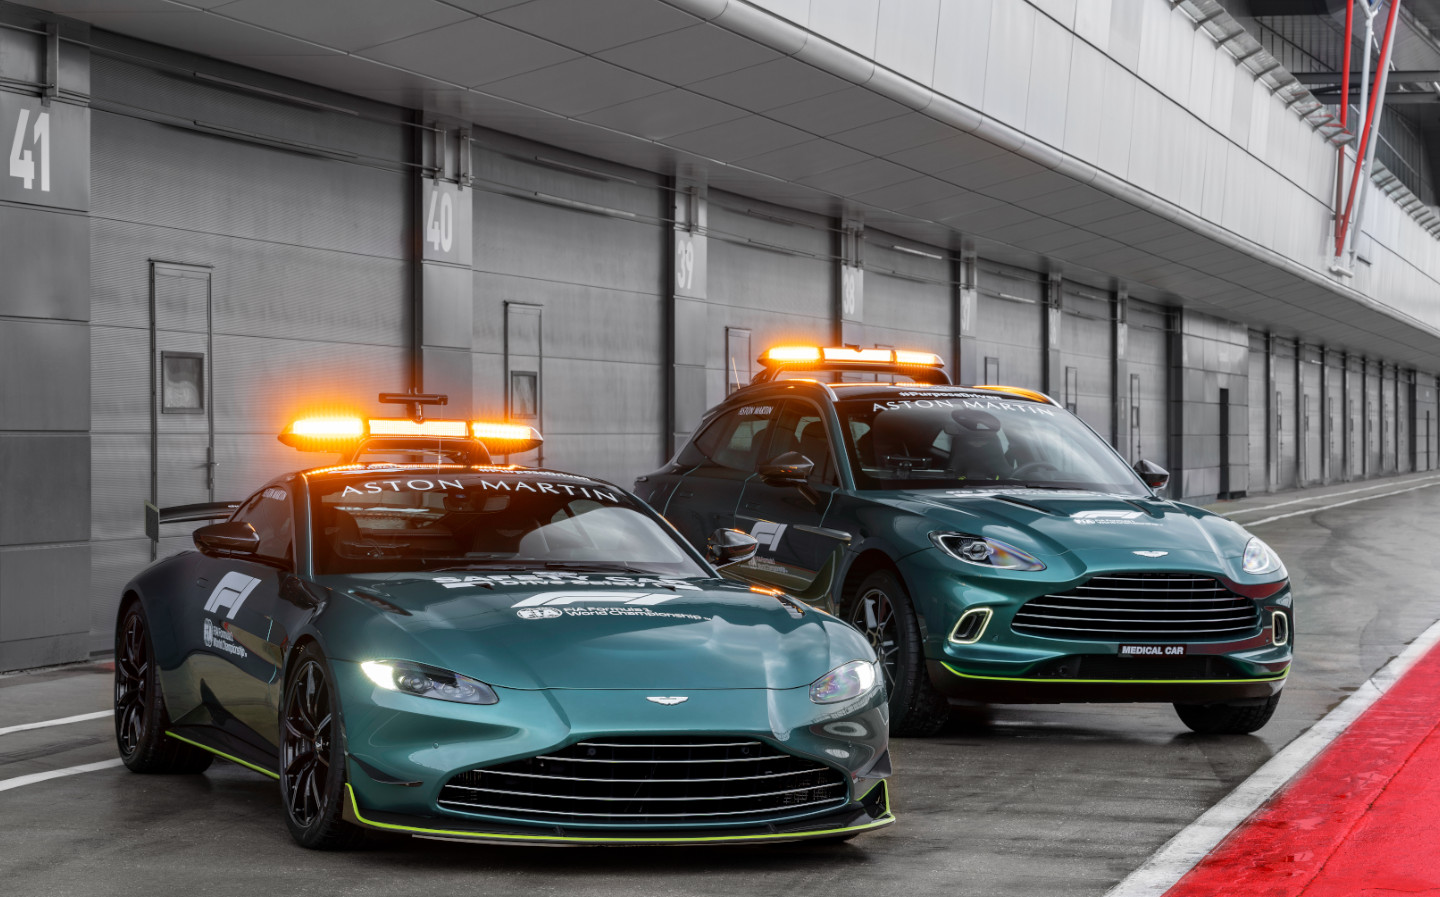 Aston Martin to provide F1 safety cars for 2021